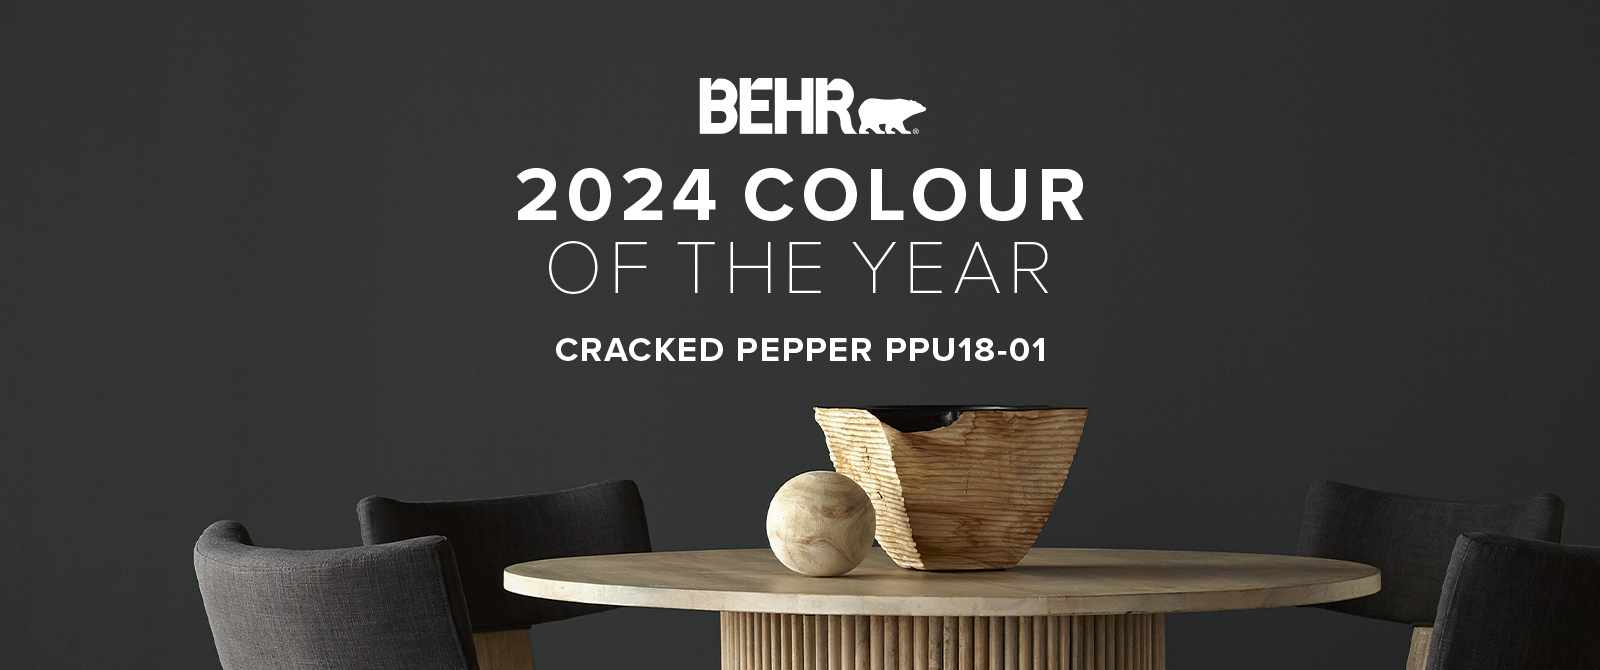 NEW BEHR 2024 Colour of the Year - Cracked Pepper